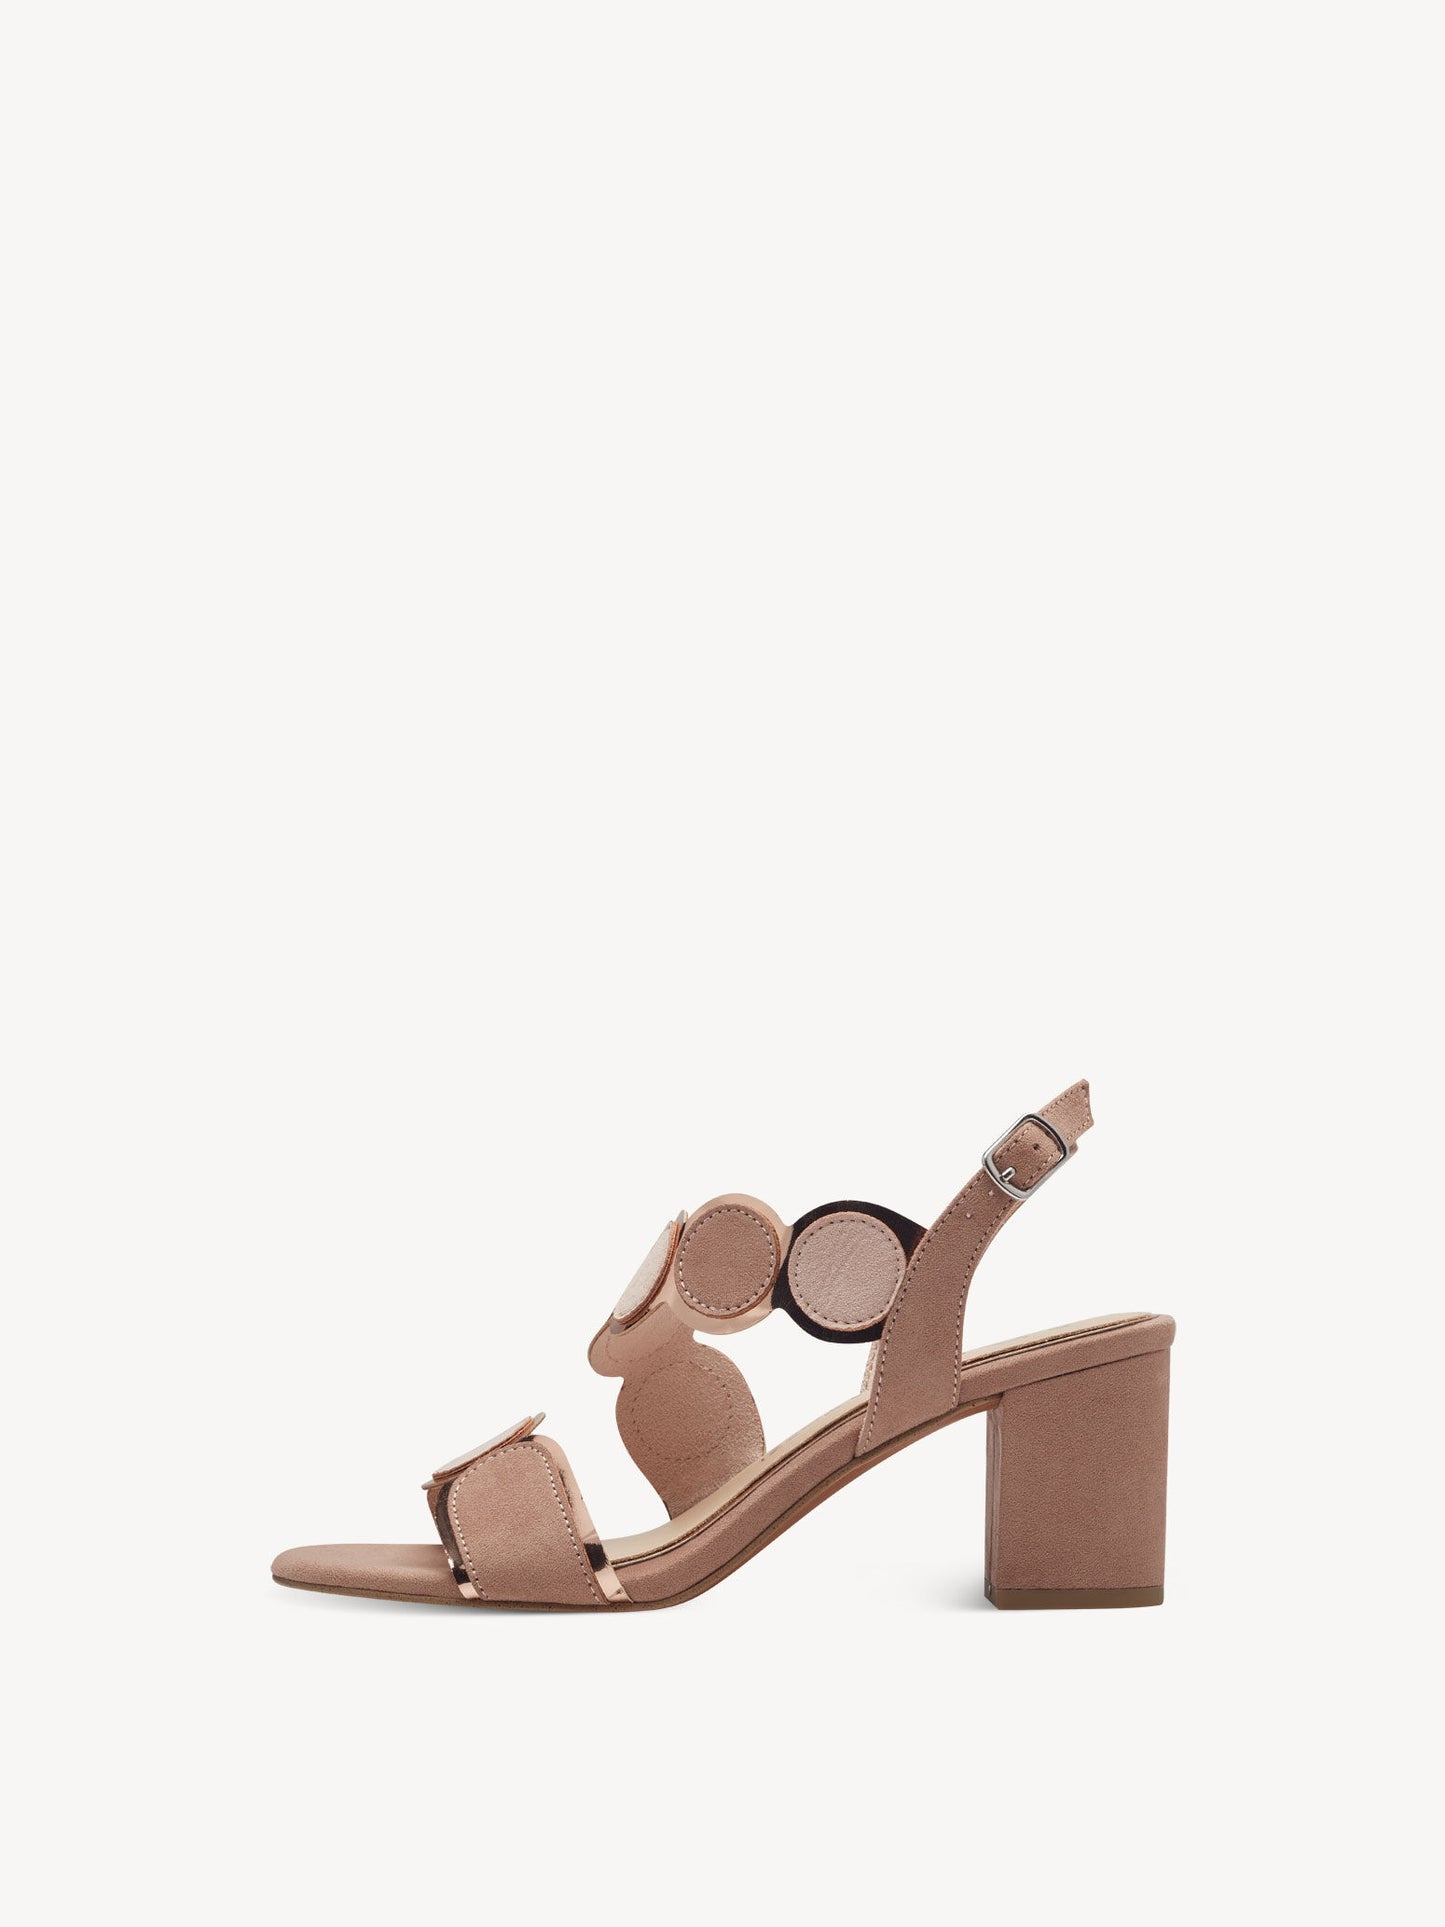 Marco Tozzi Nude and Rose Gold Healed Sandal